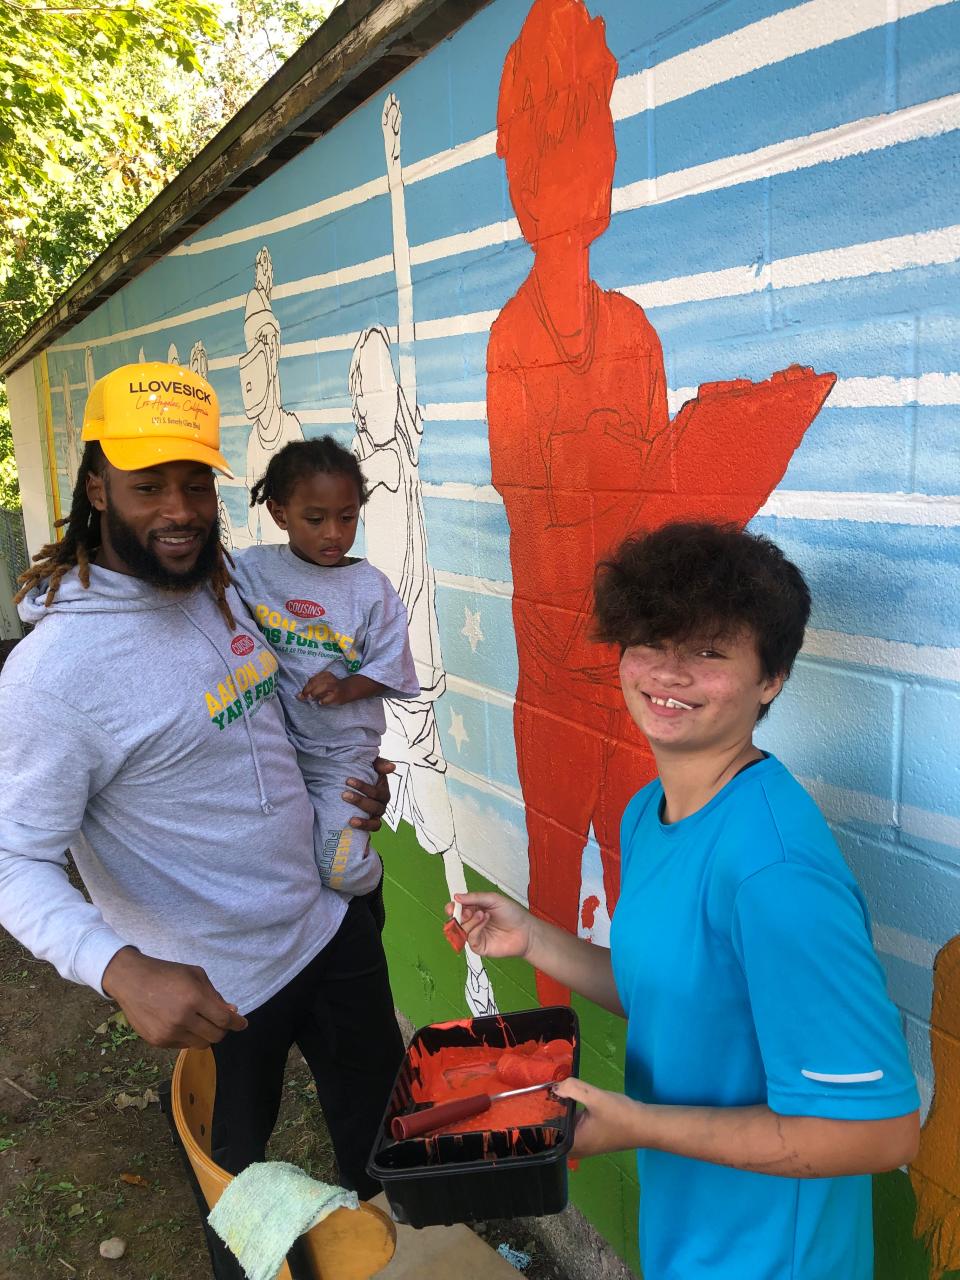 Packers' running back Aaron Jones helps paint a mural with his son and club member Jade Giesler, 13, at the Boys and Girls Club of Greater Green Bay Nagel Unit-West Side Clubhouse during the summer of 2022 in Green Bay, Wisconsin.